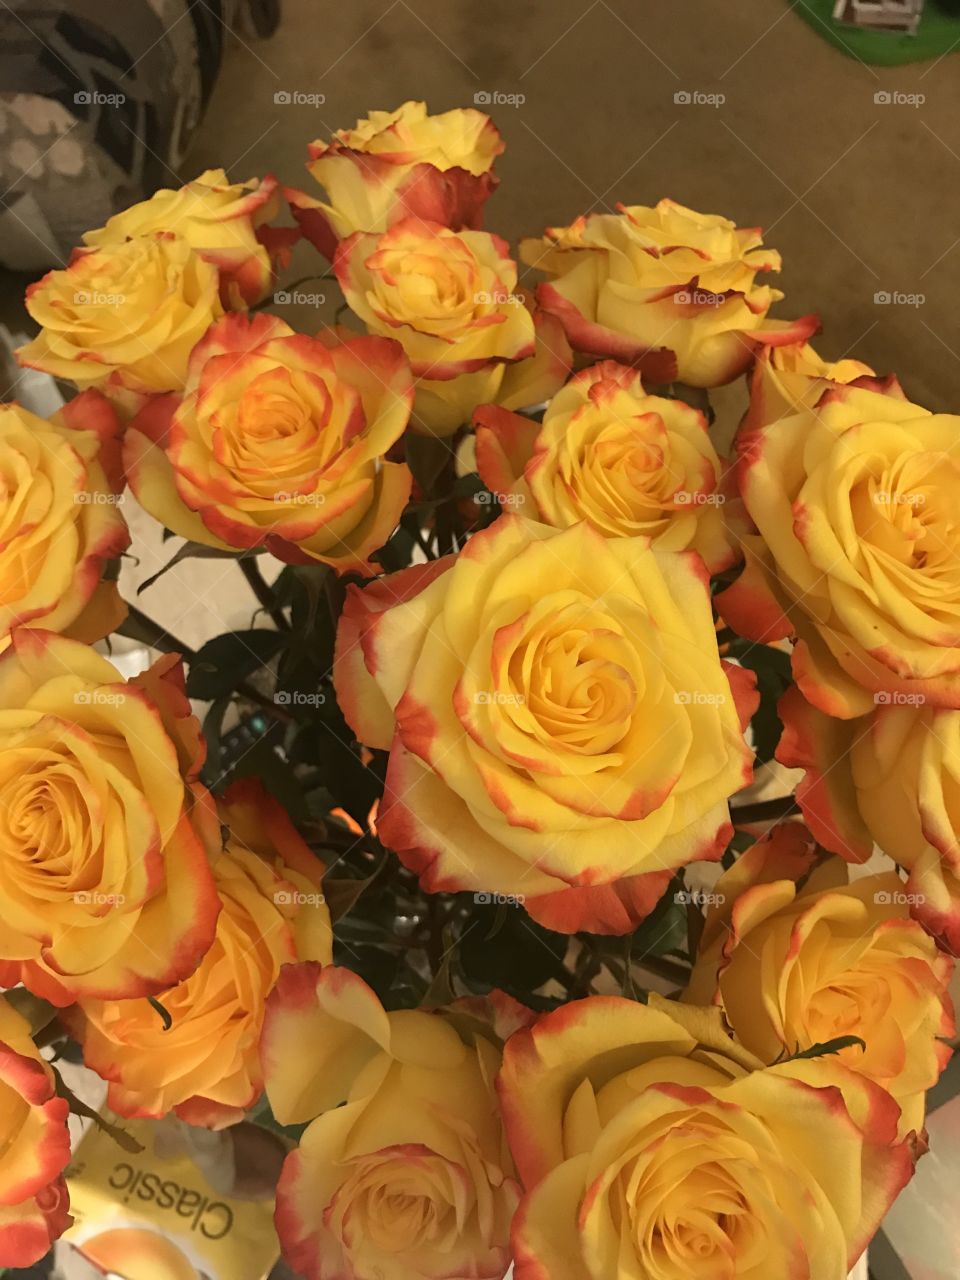 Beautiful flowers roses yellow and red huge 